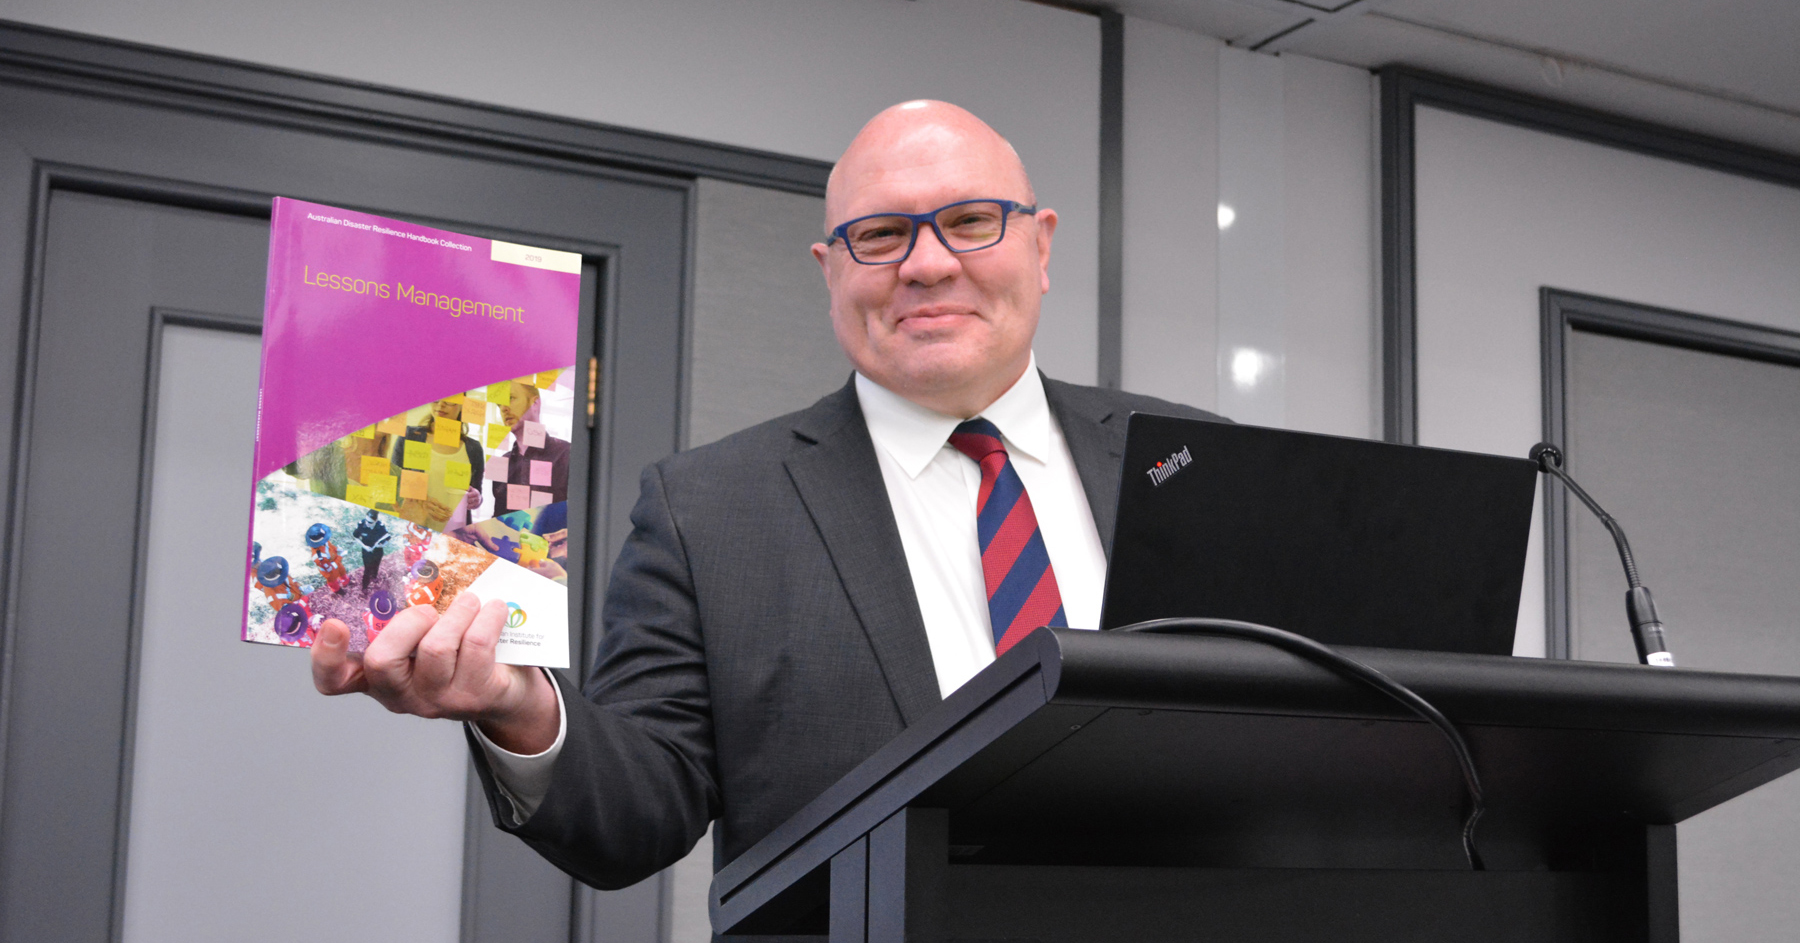 Emergency Management Australian Director-General Rob Cameron launches the Lessons Management Handbook at the Forum.